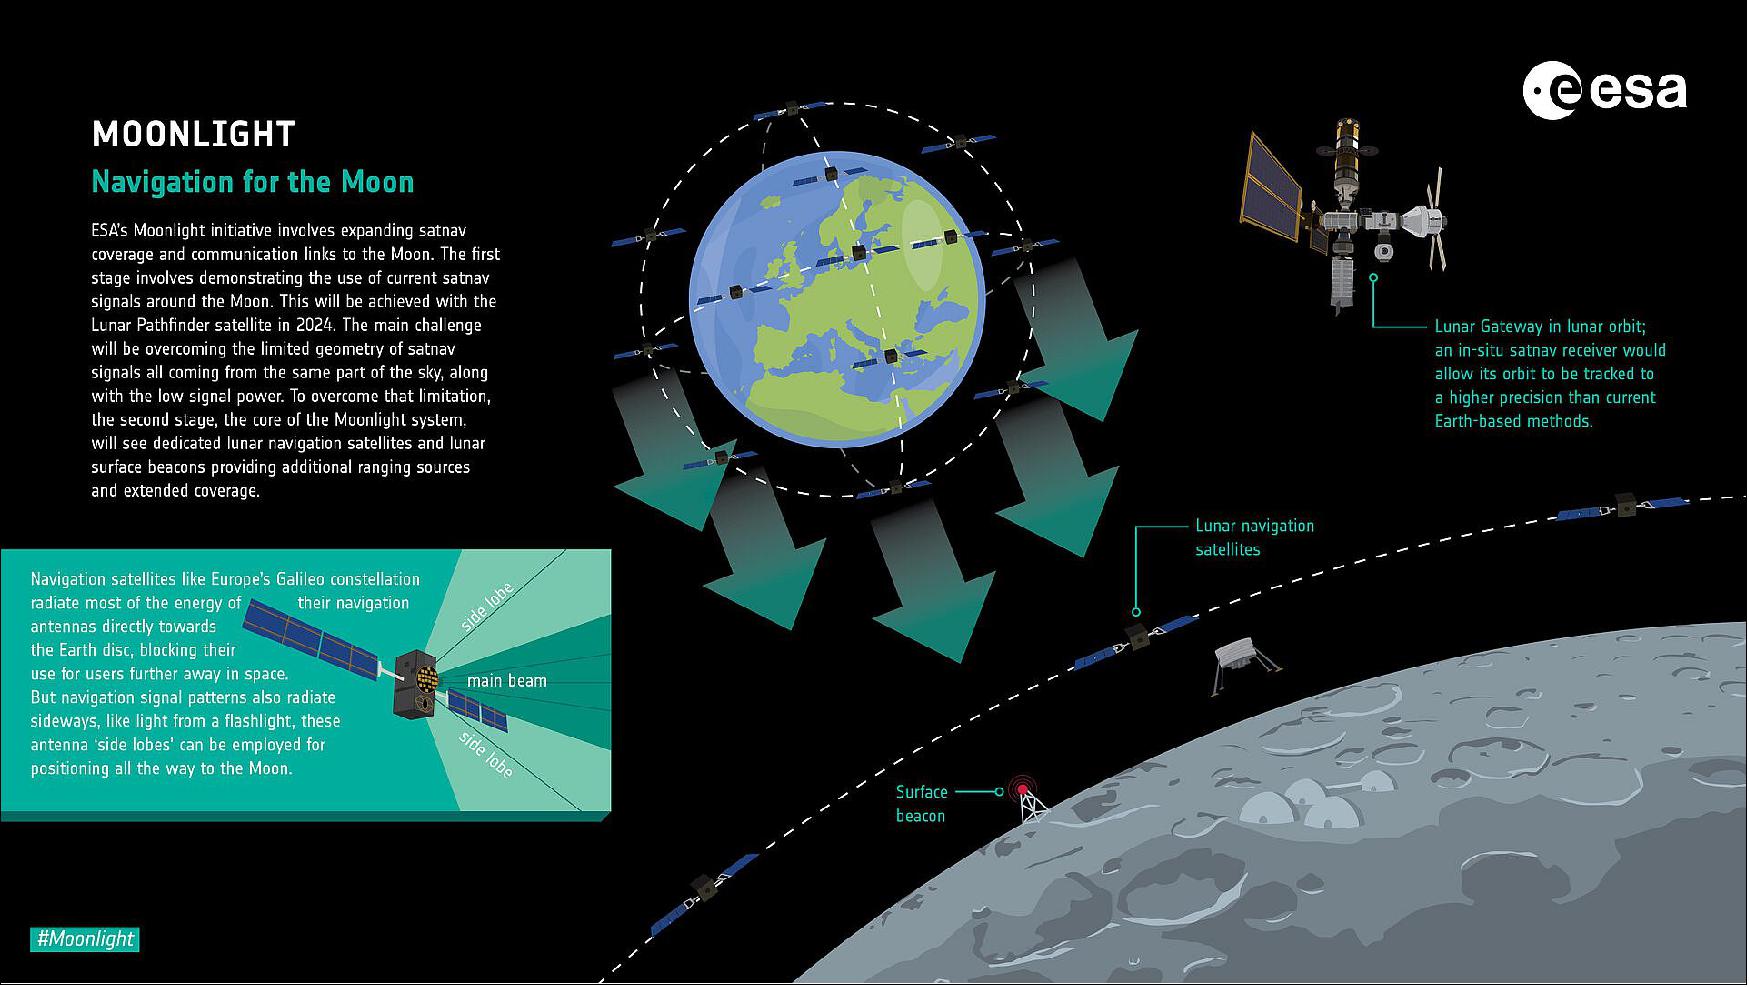 Figure 14: Infographic: Moonlight - Navigation for the Moon. ESA’s Moonlight initiative involves expanding satnav coverage and communication links to the Moon. The first stage involves demonstrating the use of current satnav signals around the Moon. This will be achieved with the Lunar Pathfinder satellite in 2024. The main challenge will be overcoming the limited geometry of satnav signals all coming from the same part of the sky, along with the low signal power. To overcome that limitation, the second stage, the core of the Moonlight system, will see dedicated lunar navigation satellites and lunar surface beacons providing additional ranging sources and extended coverage (image credit: ESA, K Oldenburg)